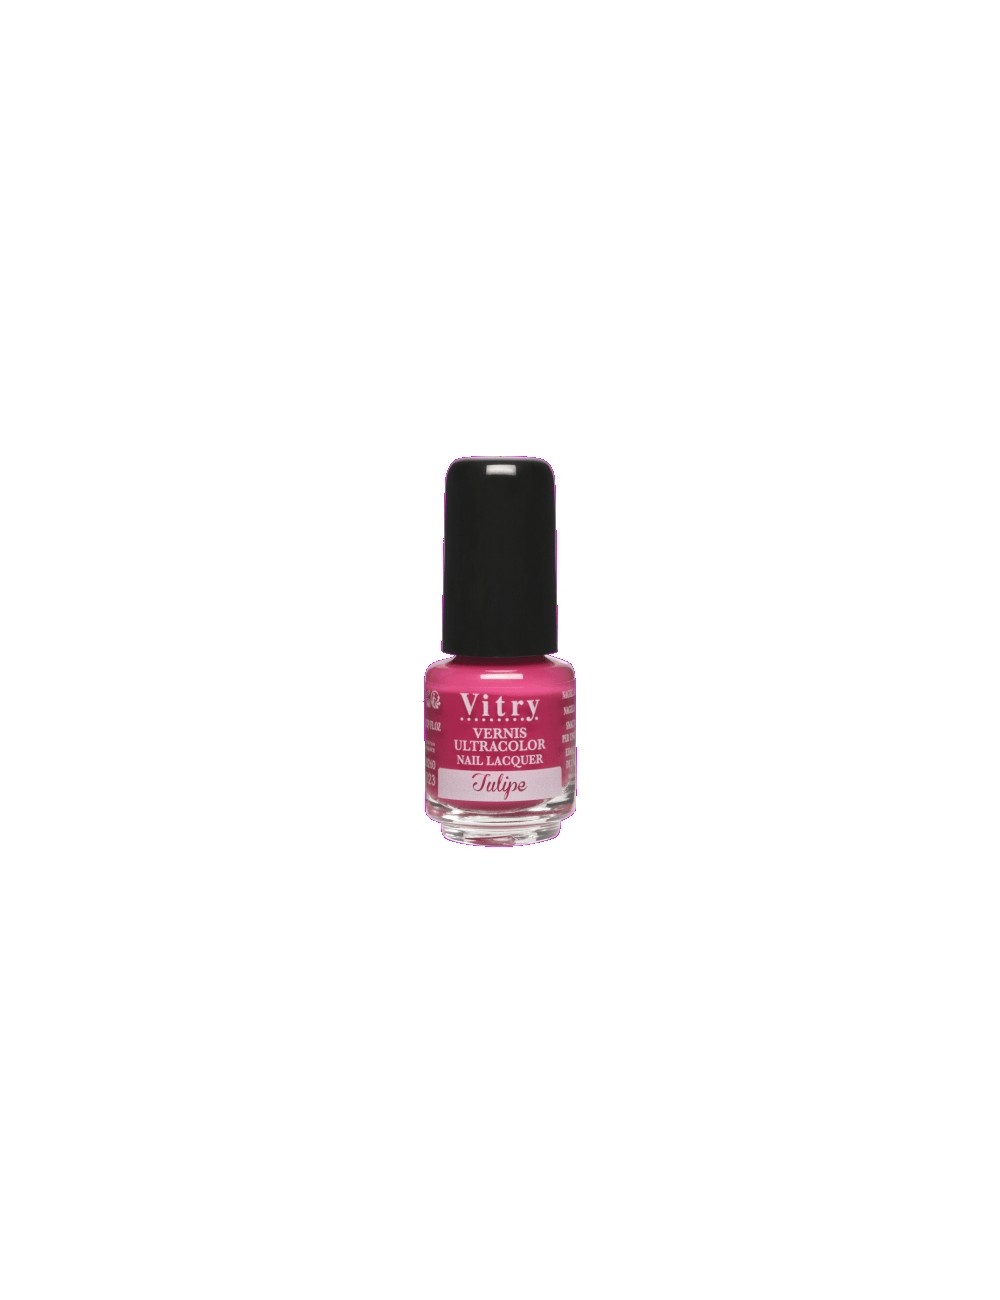 Vernis 50 ml - Norme contact alimentaire - Vernis protecteur - 10